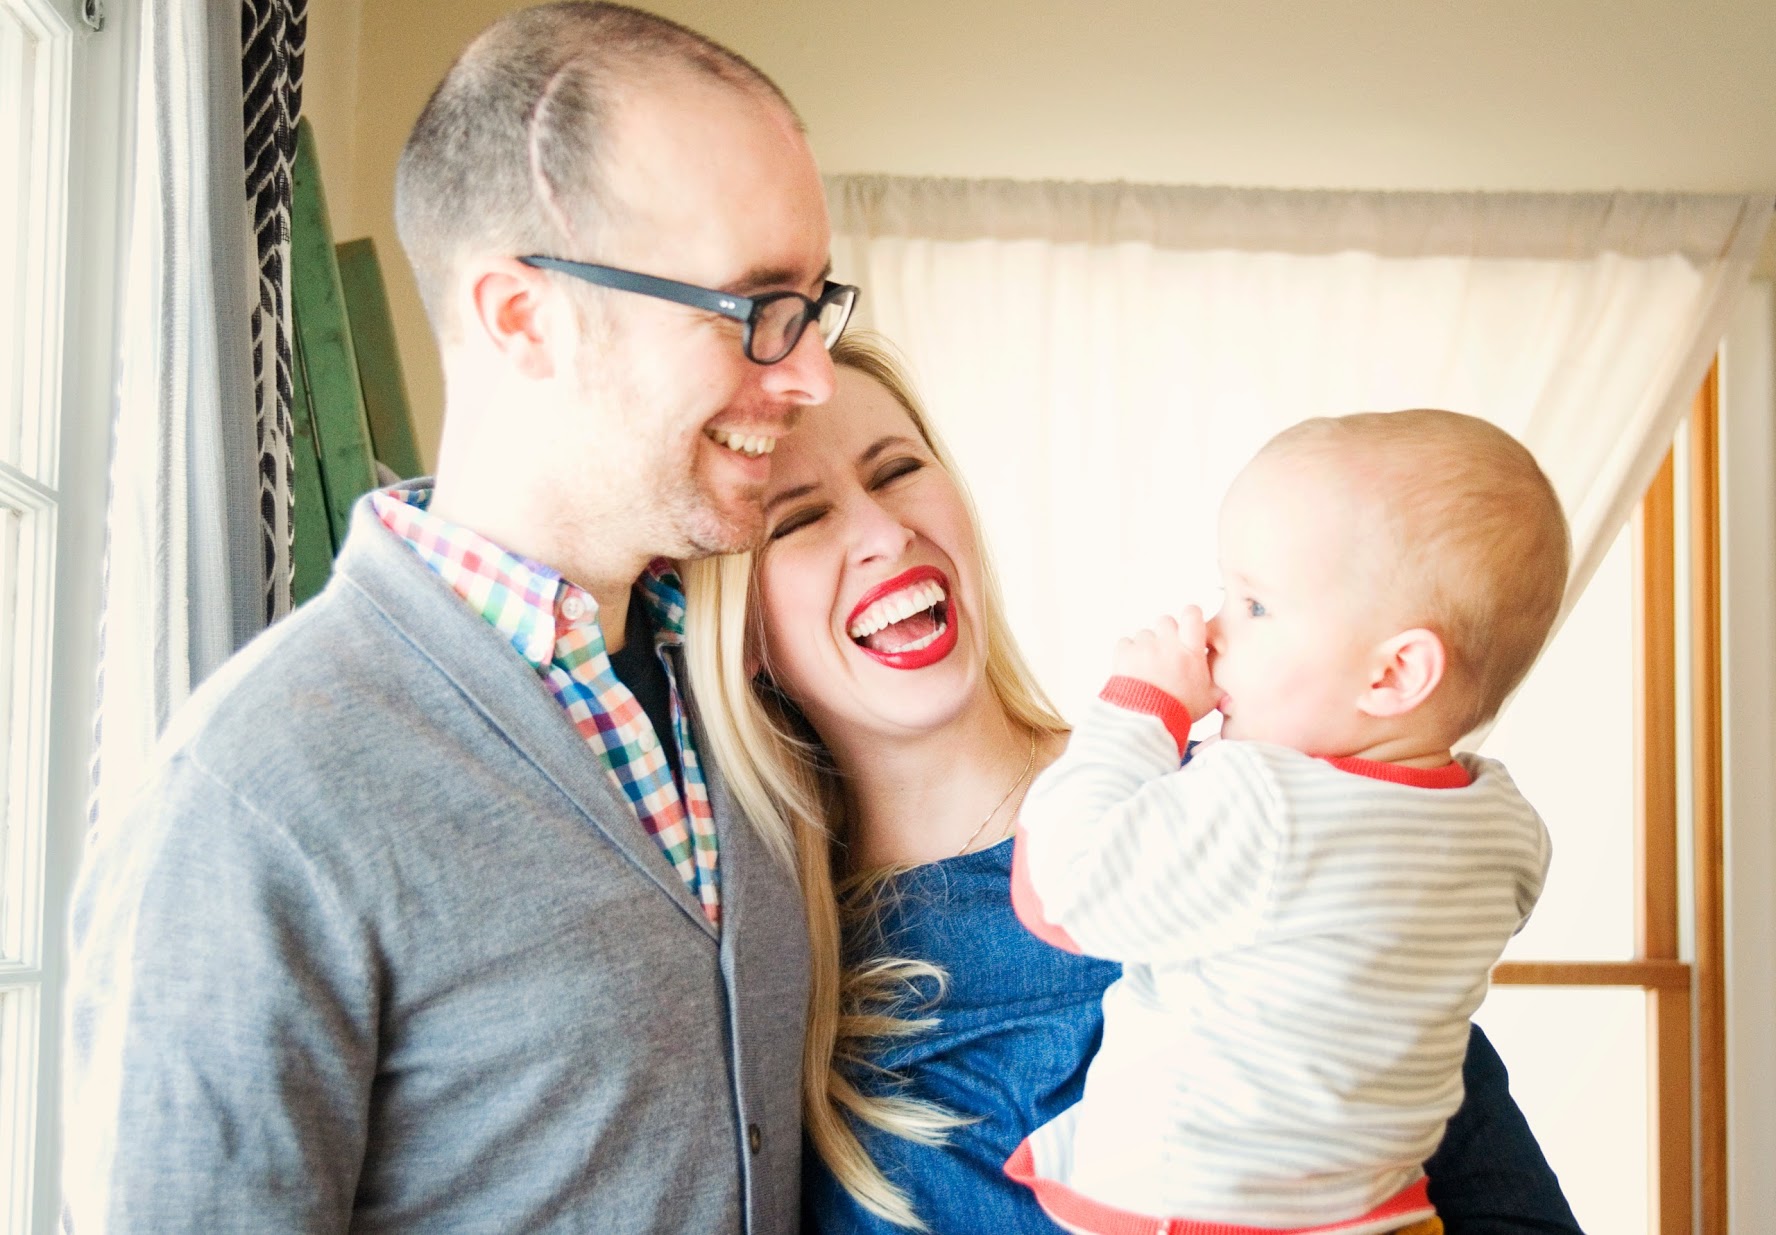 Aaron Purmort, with Nora McInerny Purmort and their son in 2014 (Kelly Gritzmacher)